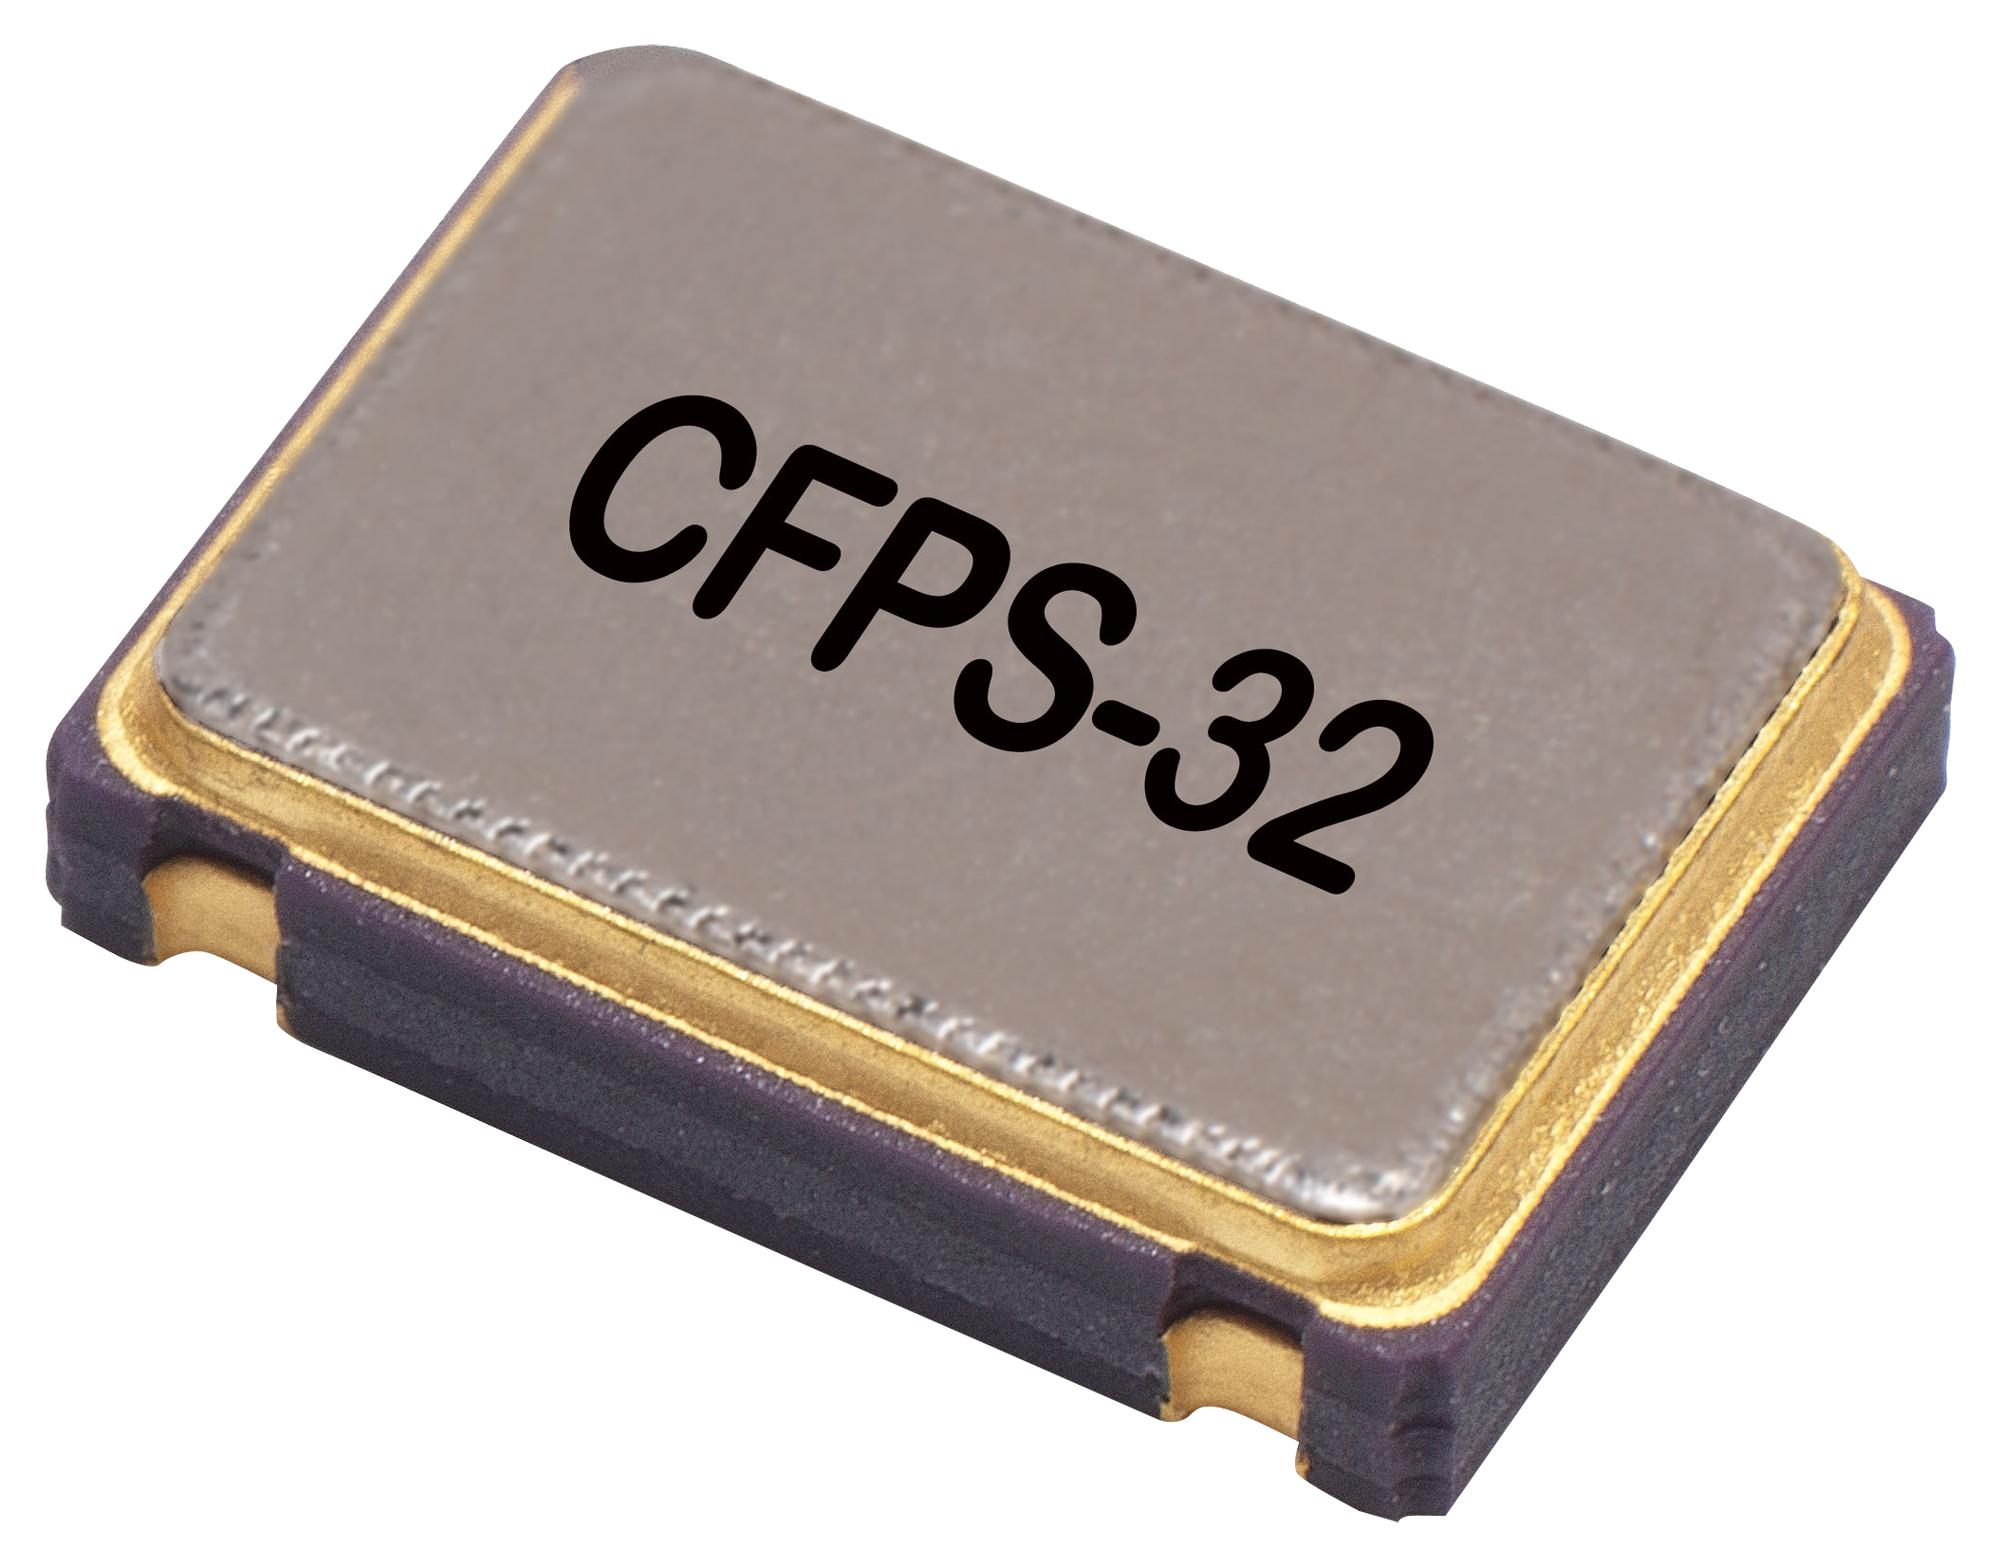 LFSPXO009618 CRYSTAL OSCILLATOR, SMD, 125MHZ IQD FREQUENCY PRODUCTS